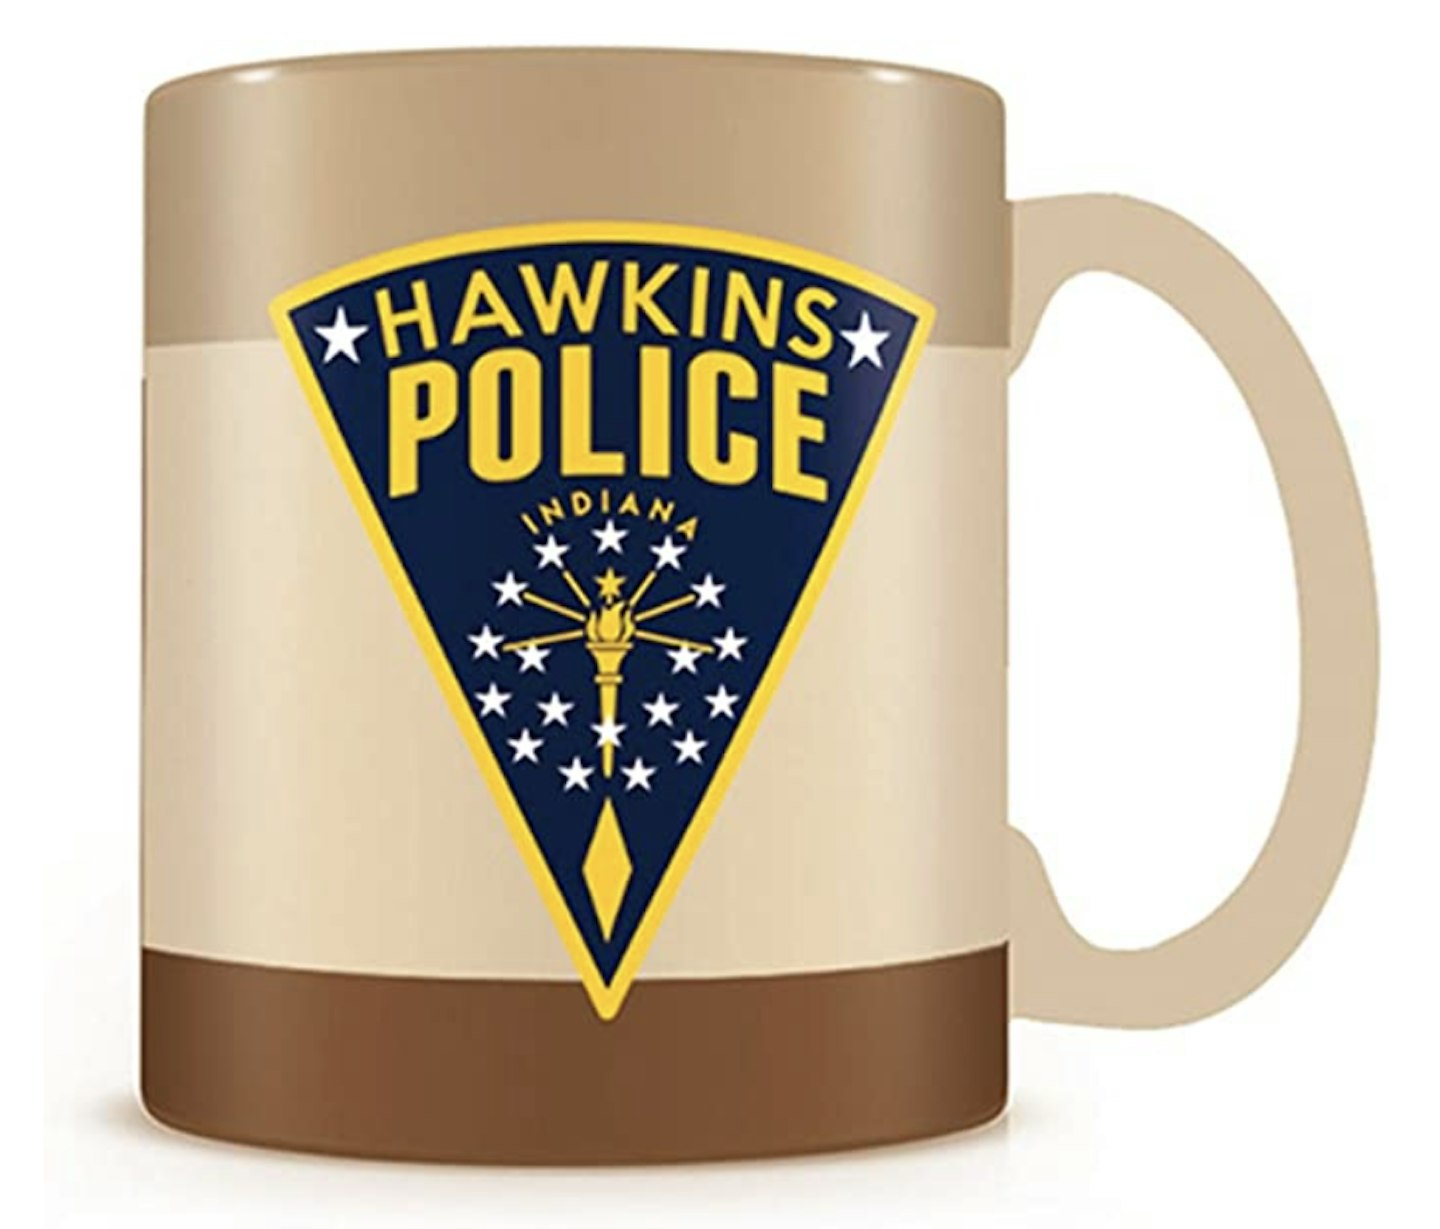 Stranger Things Ceramic Mug with Hawkins Police Badge in Presentation Box - Official Merchandise